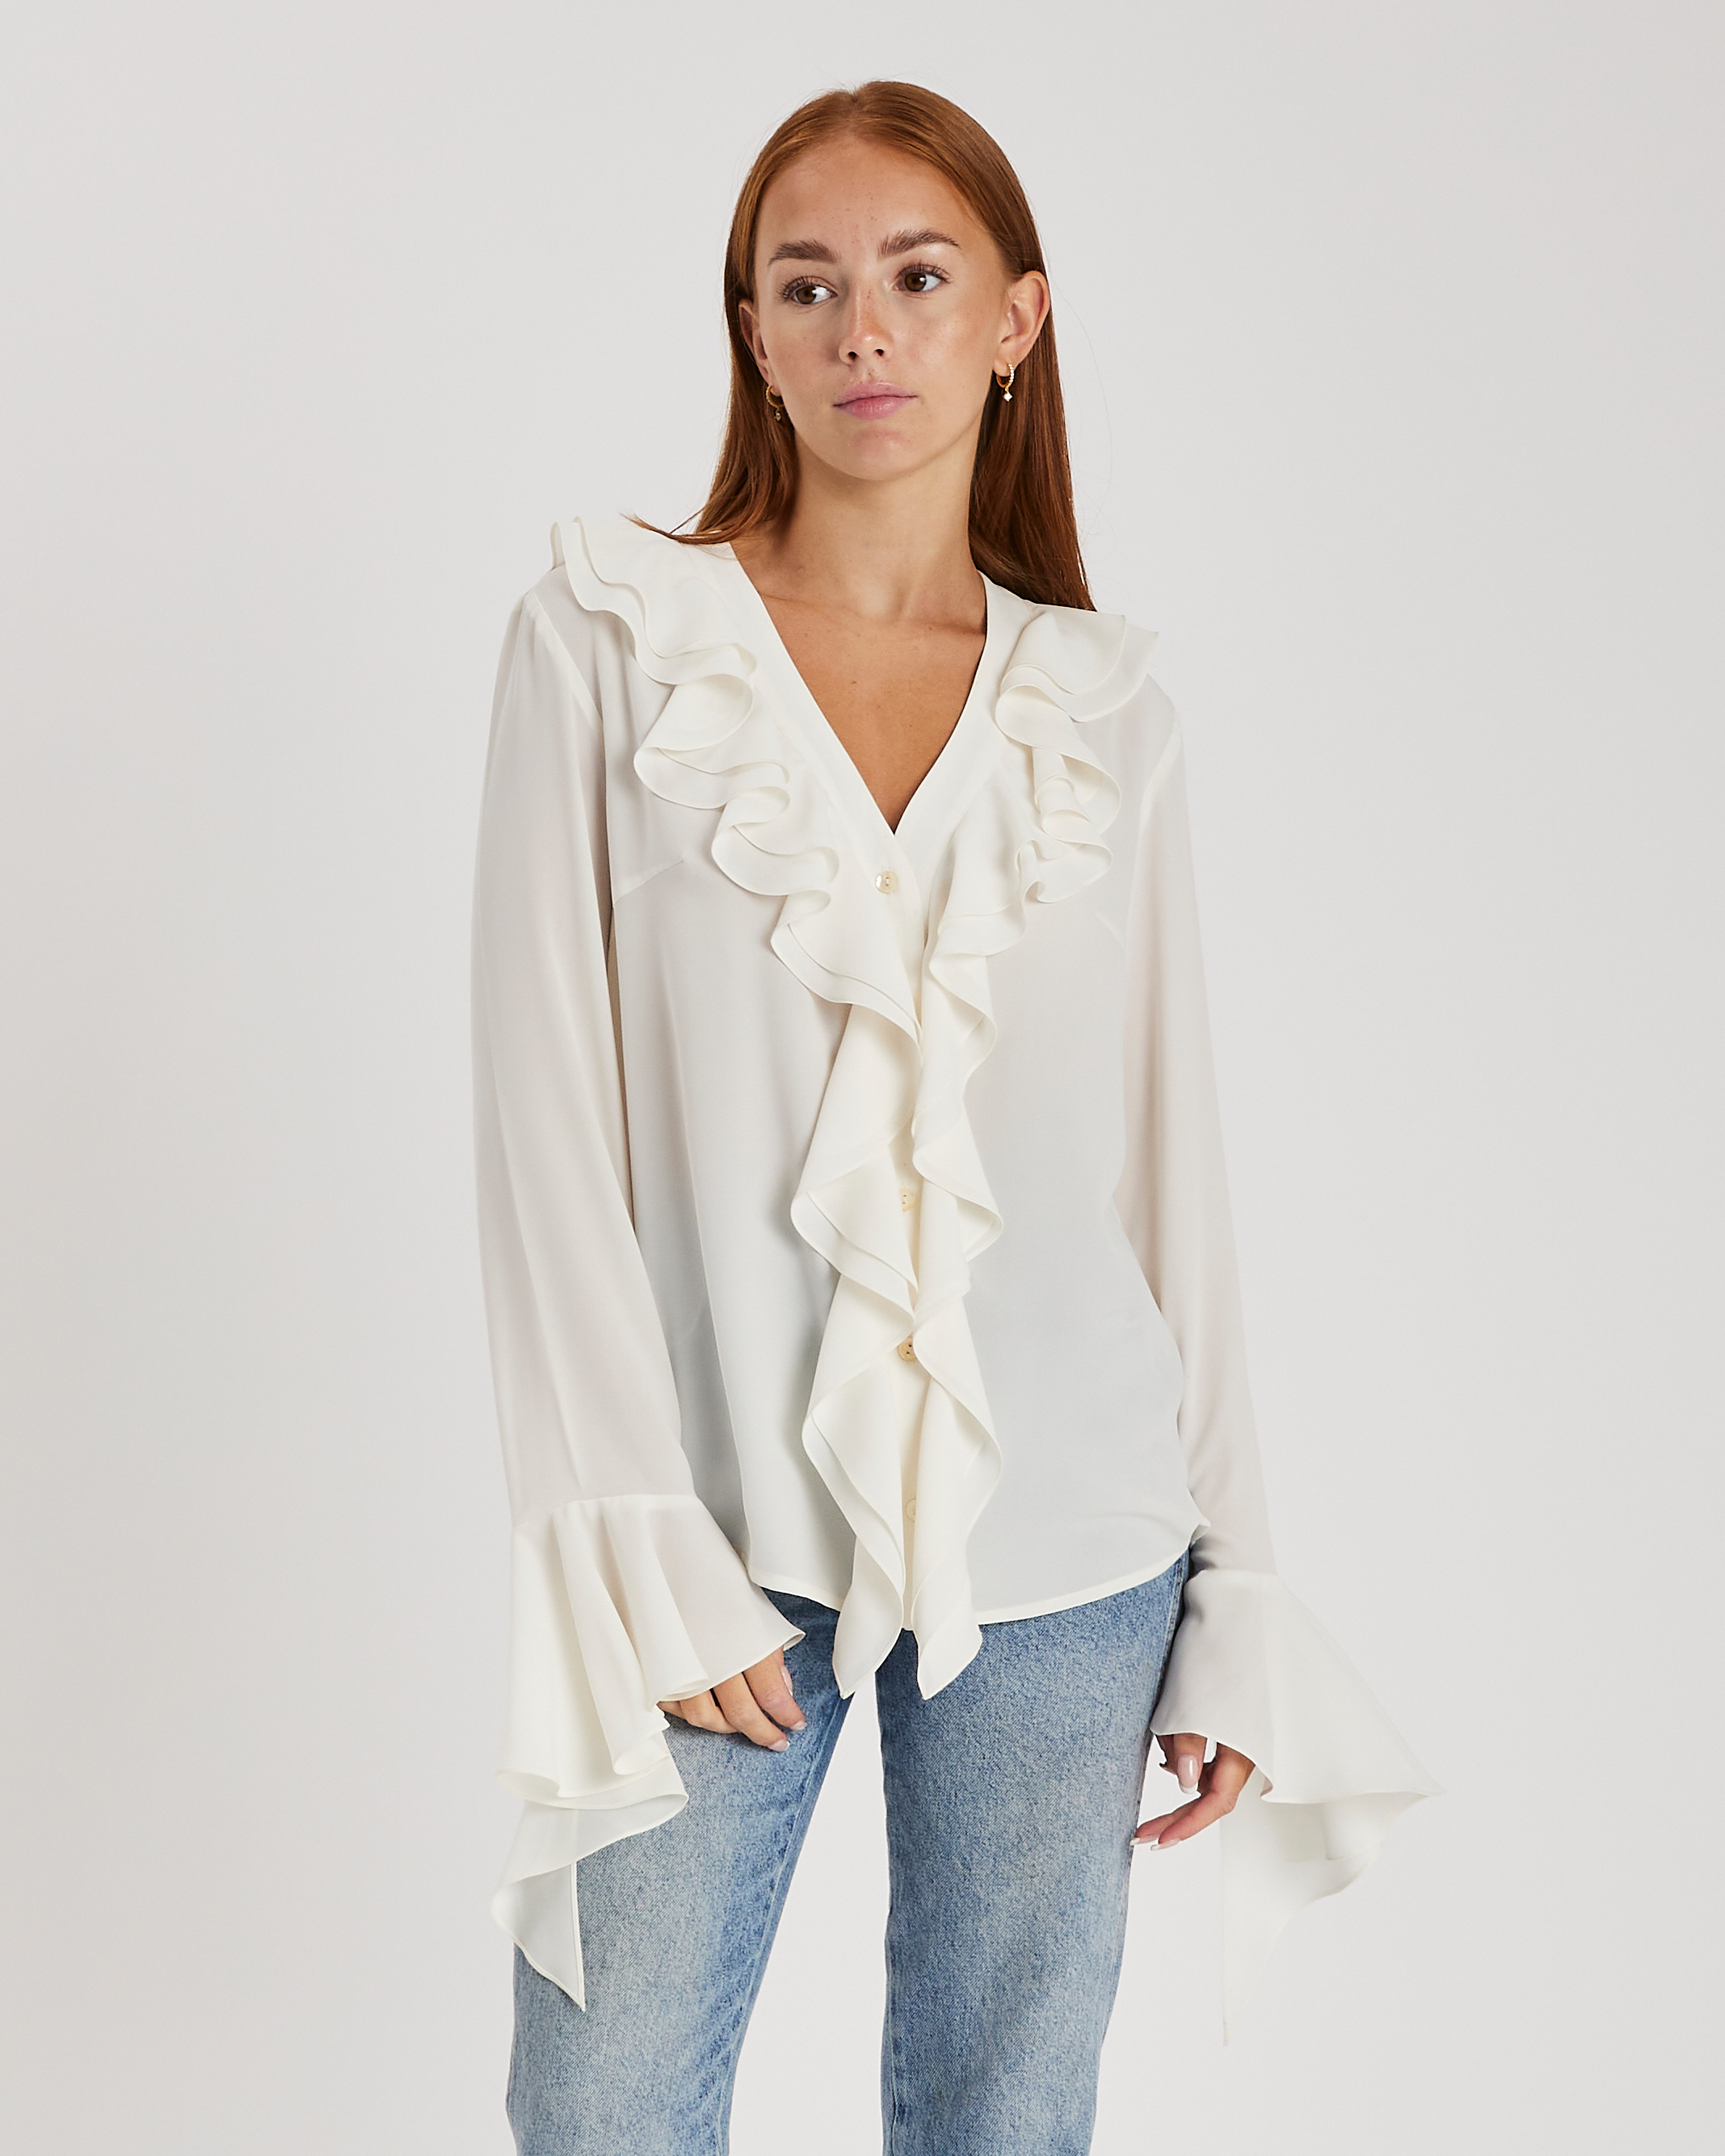 Tailored Fit Blouse with V-Neckline, Elegant Ruffles, and Asymmetrical Sleeve Detail